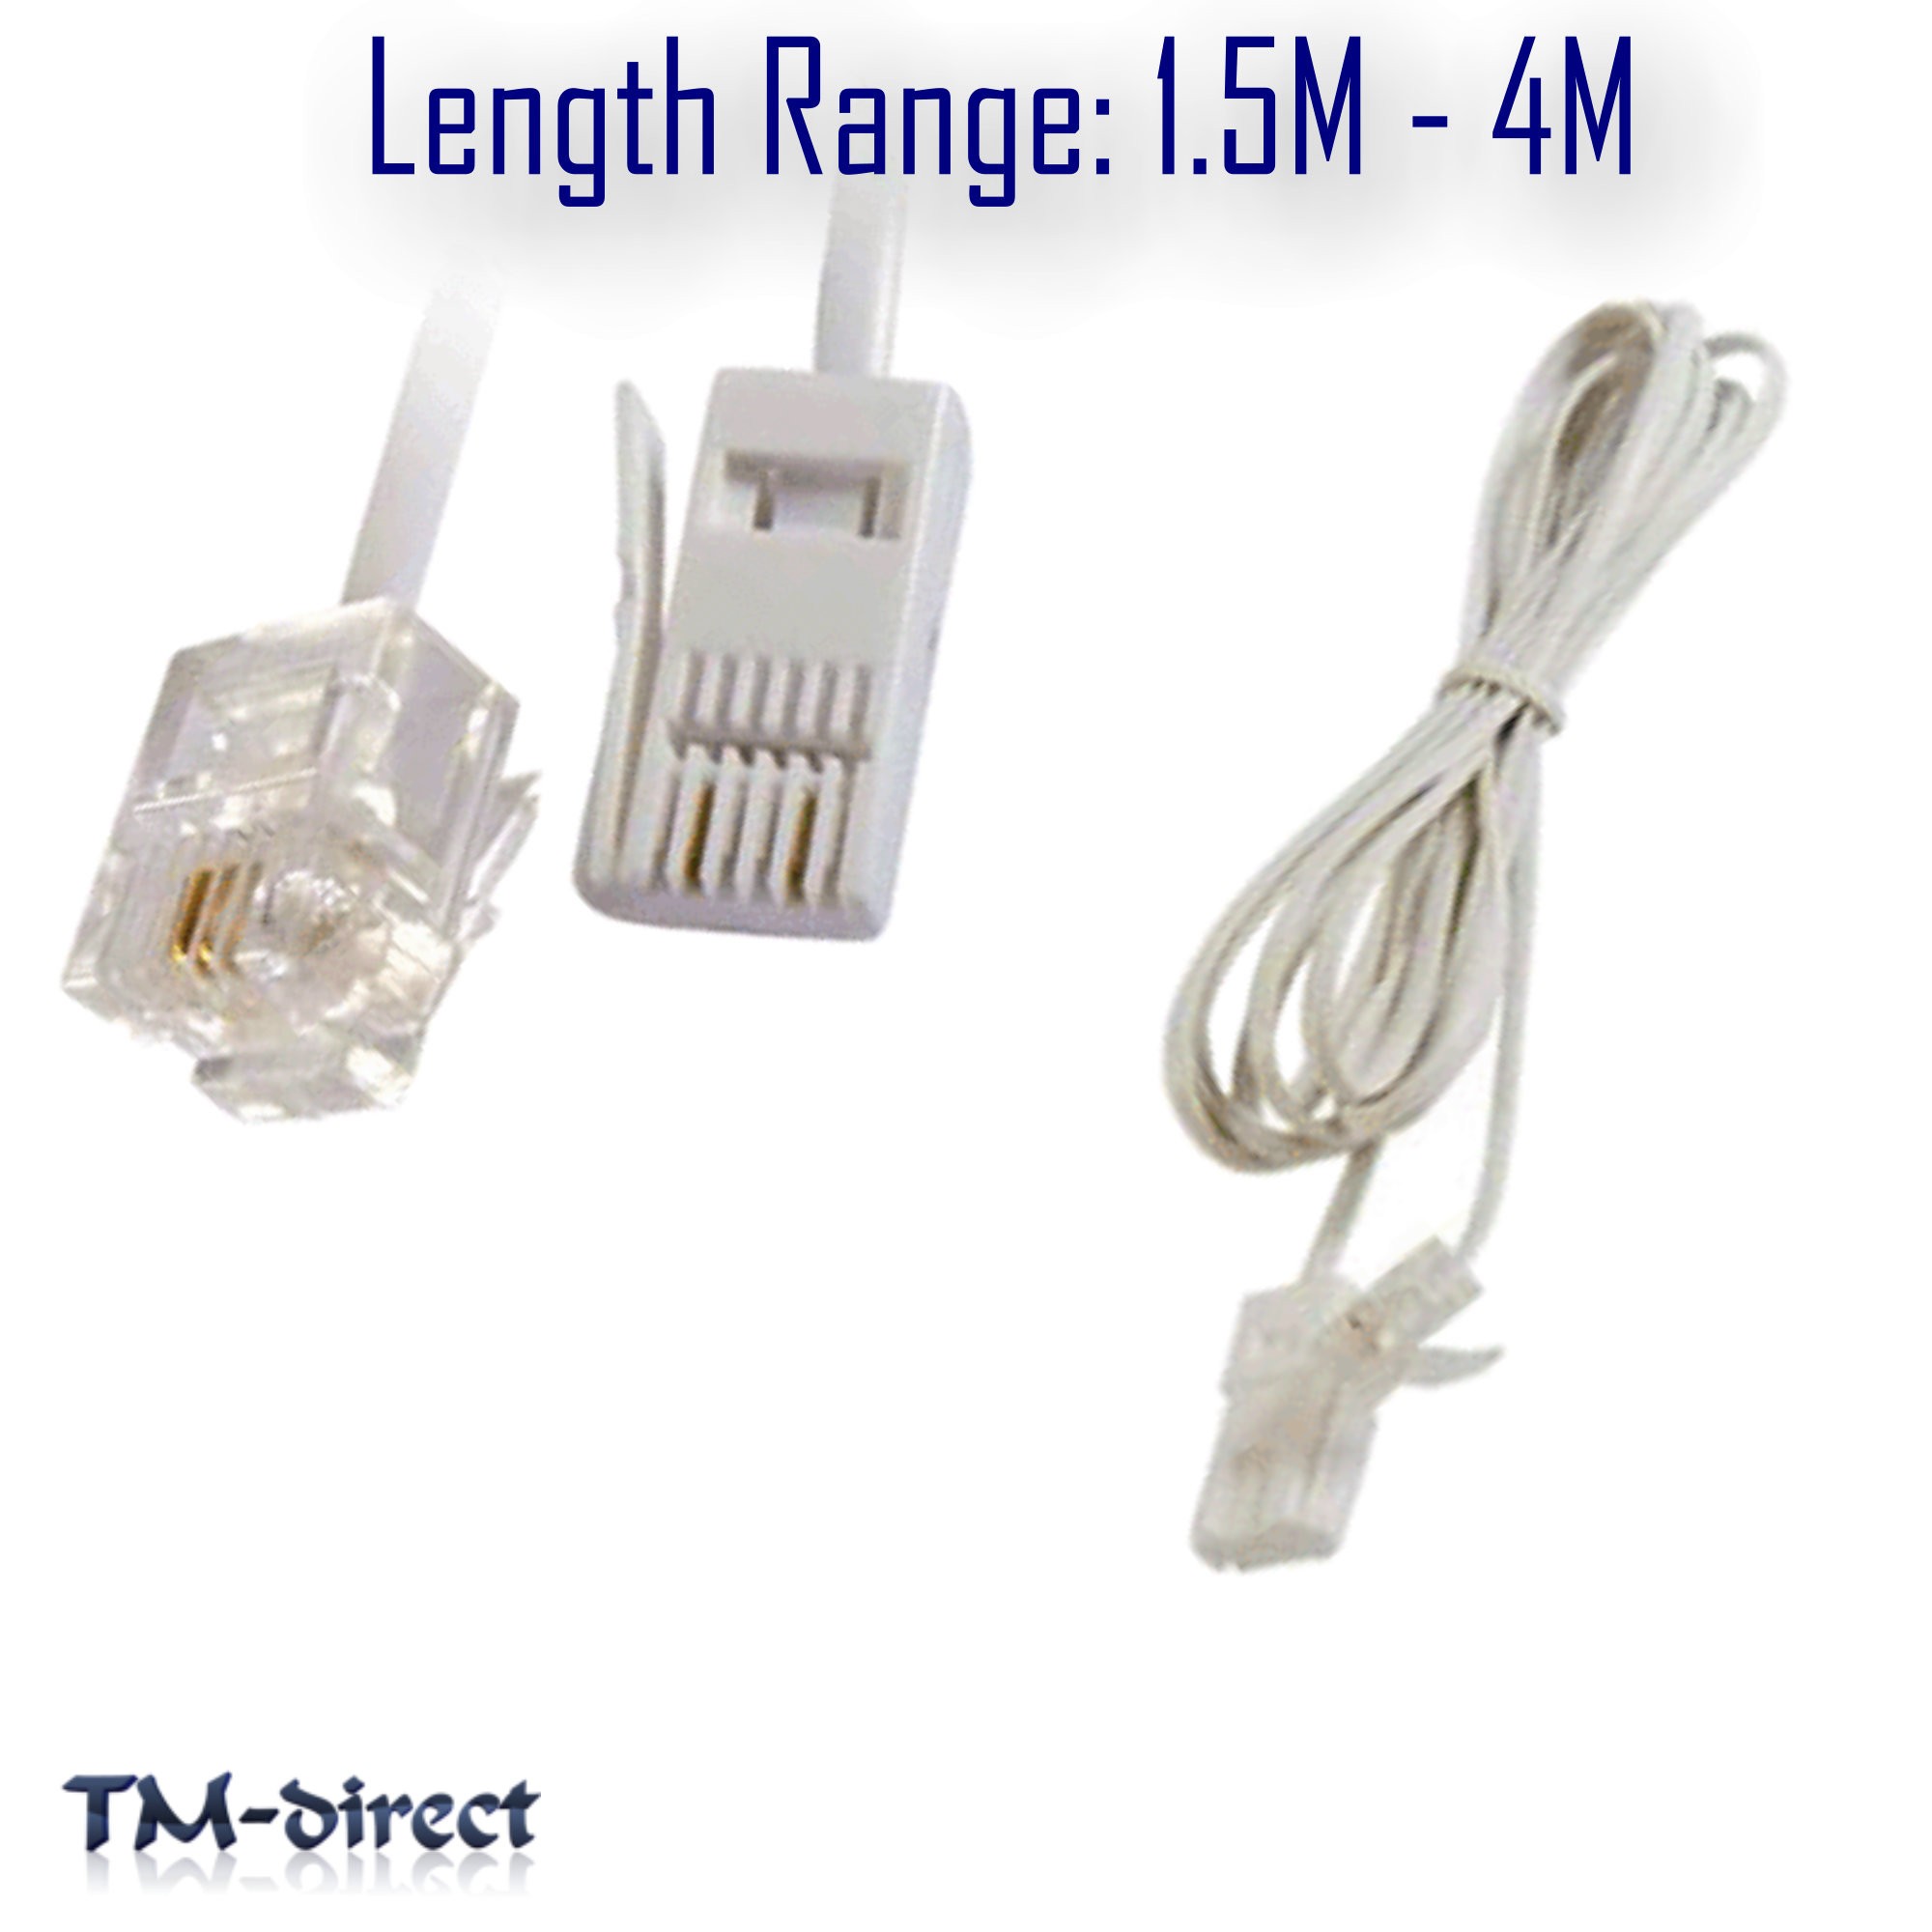 Shadow racket compliance RJ11 to BT Socket 2 Pin Cable Modem FAX Telephone Phone Plug Straight